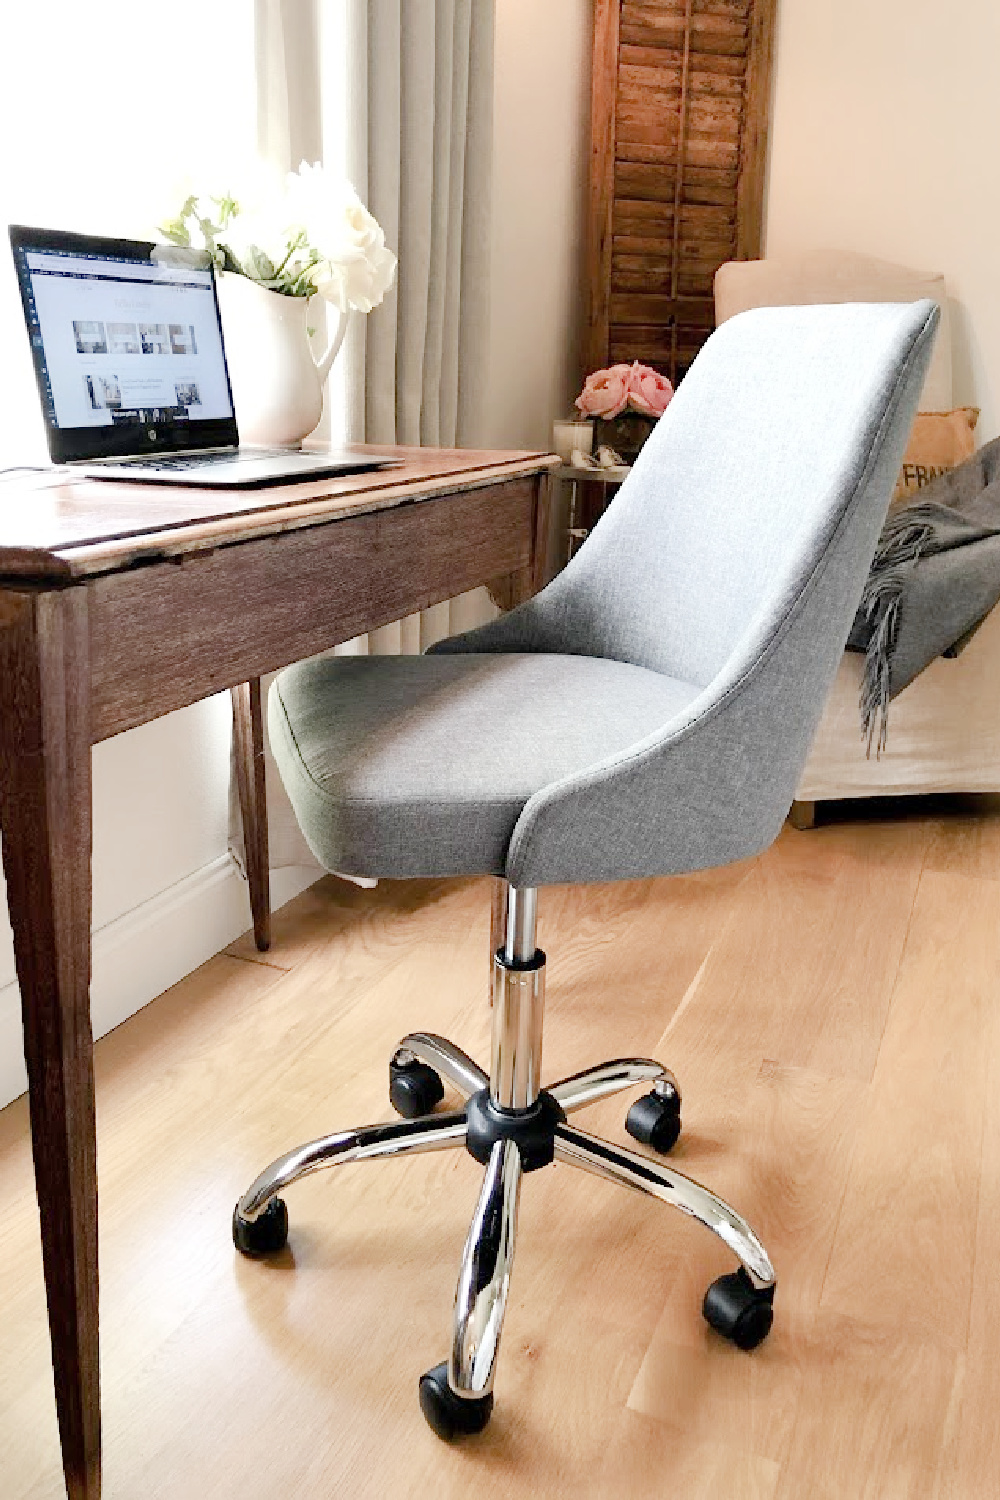 Chic grey upholstered desk chair with antique desk in our French country bedroom - Hello Lovely.